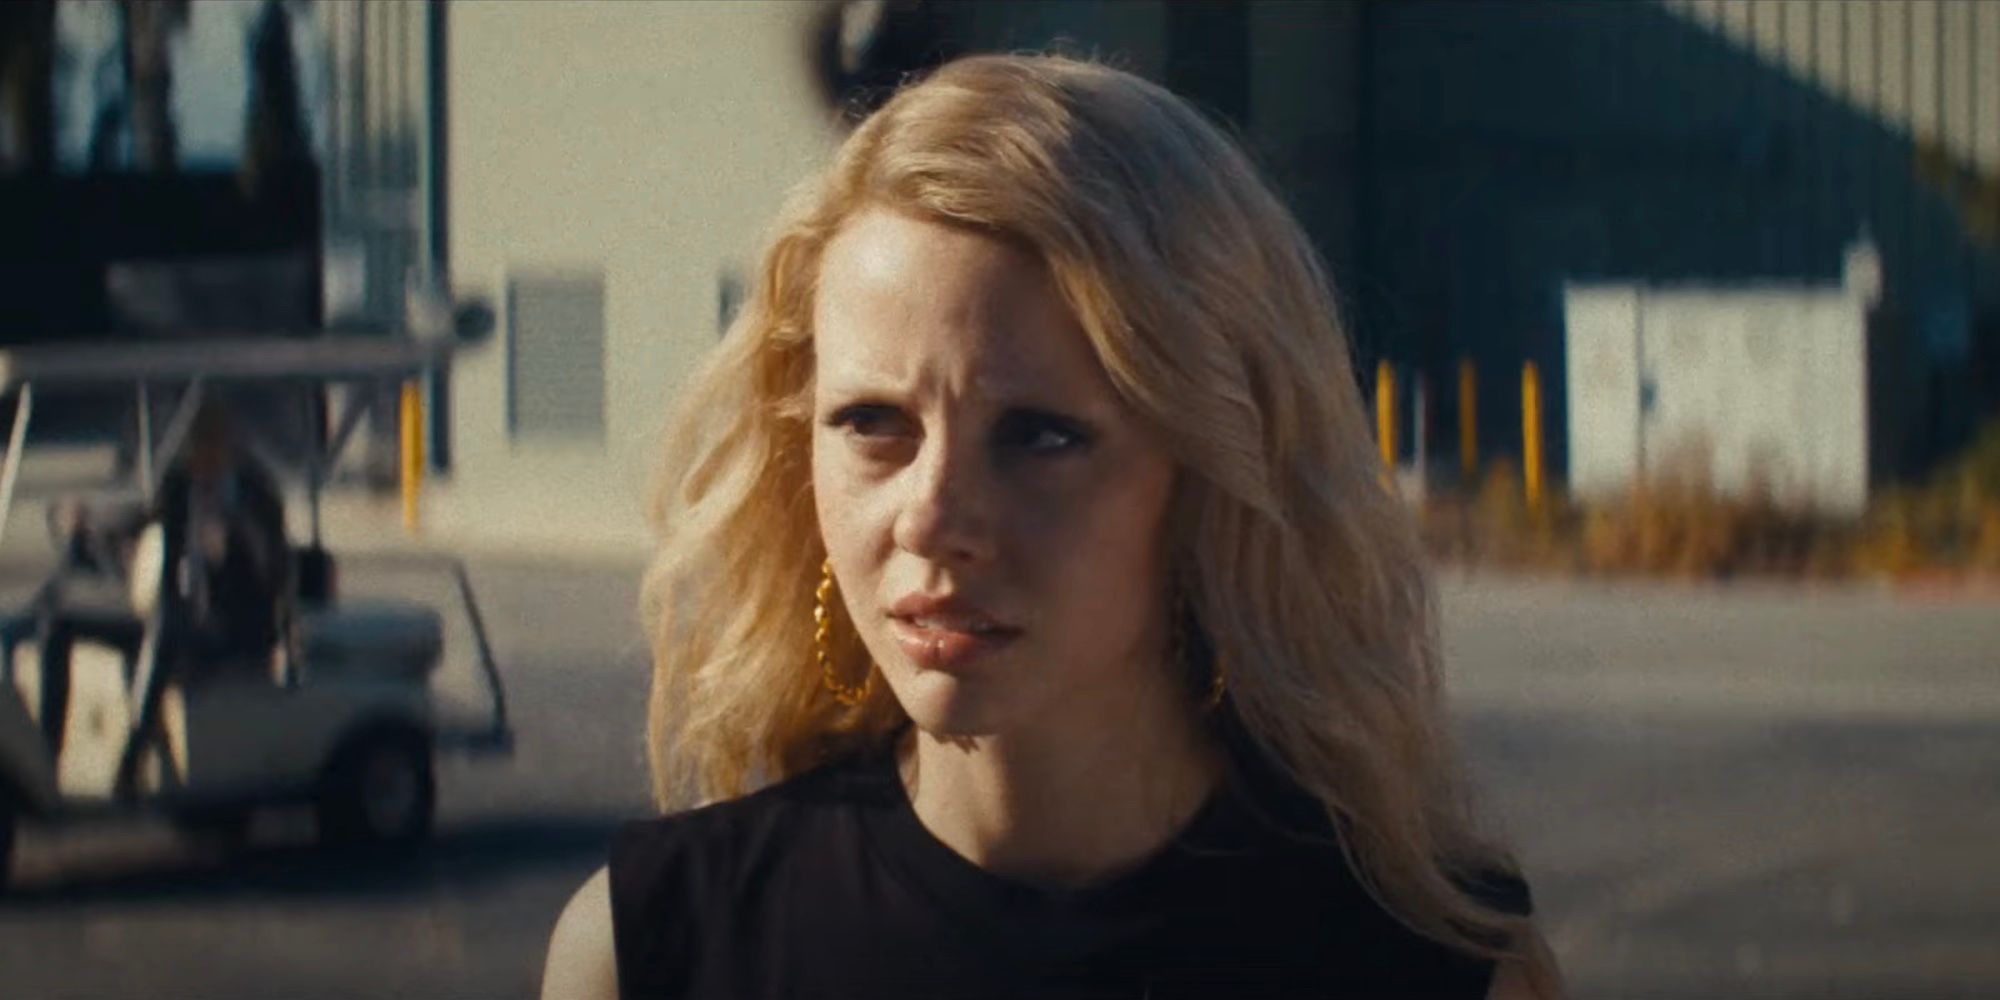 Maxine (Mia Goth) looks distraught on a studio lot in the MaXXXine trailer.